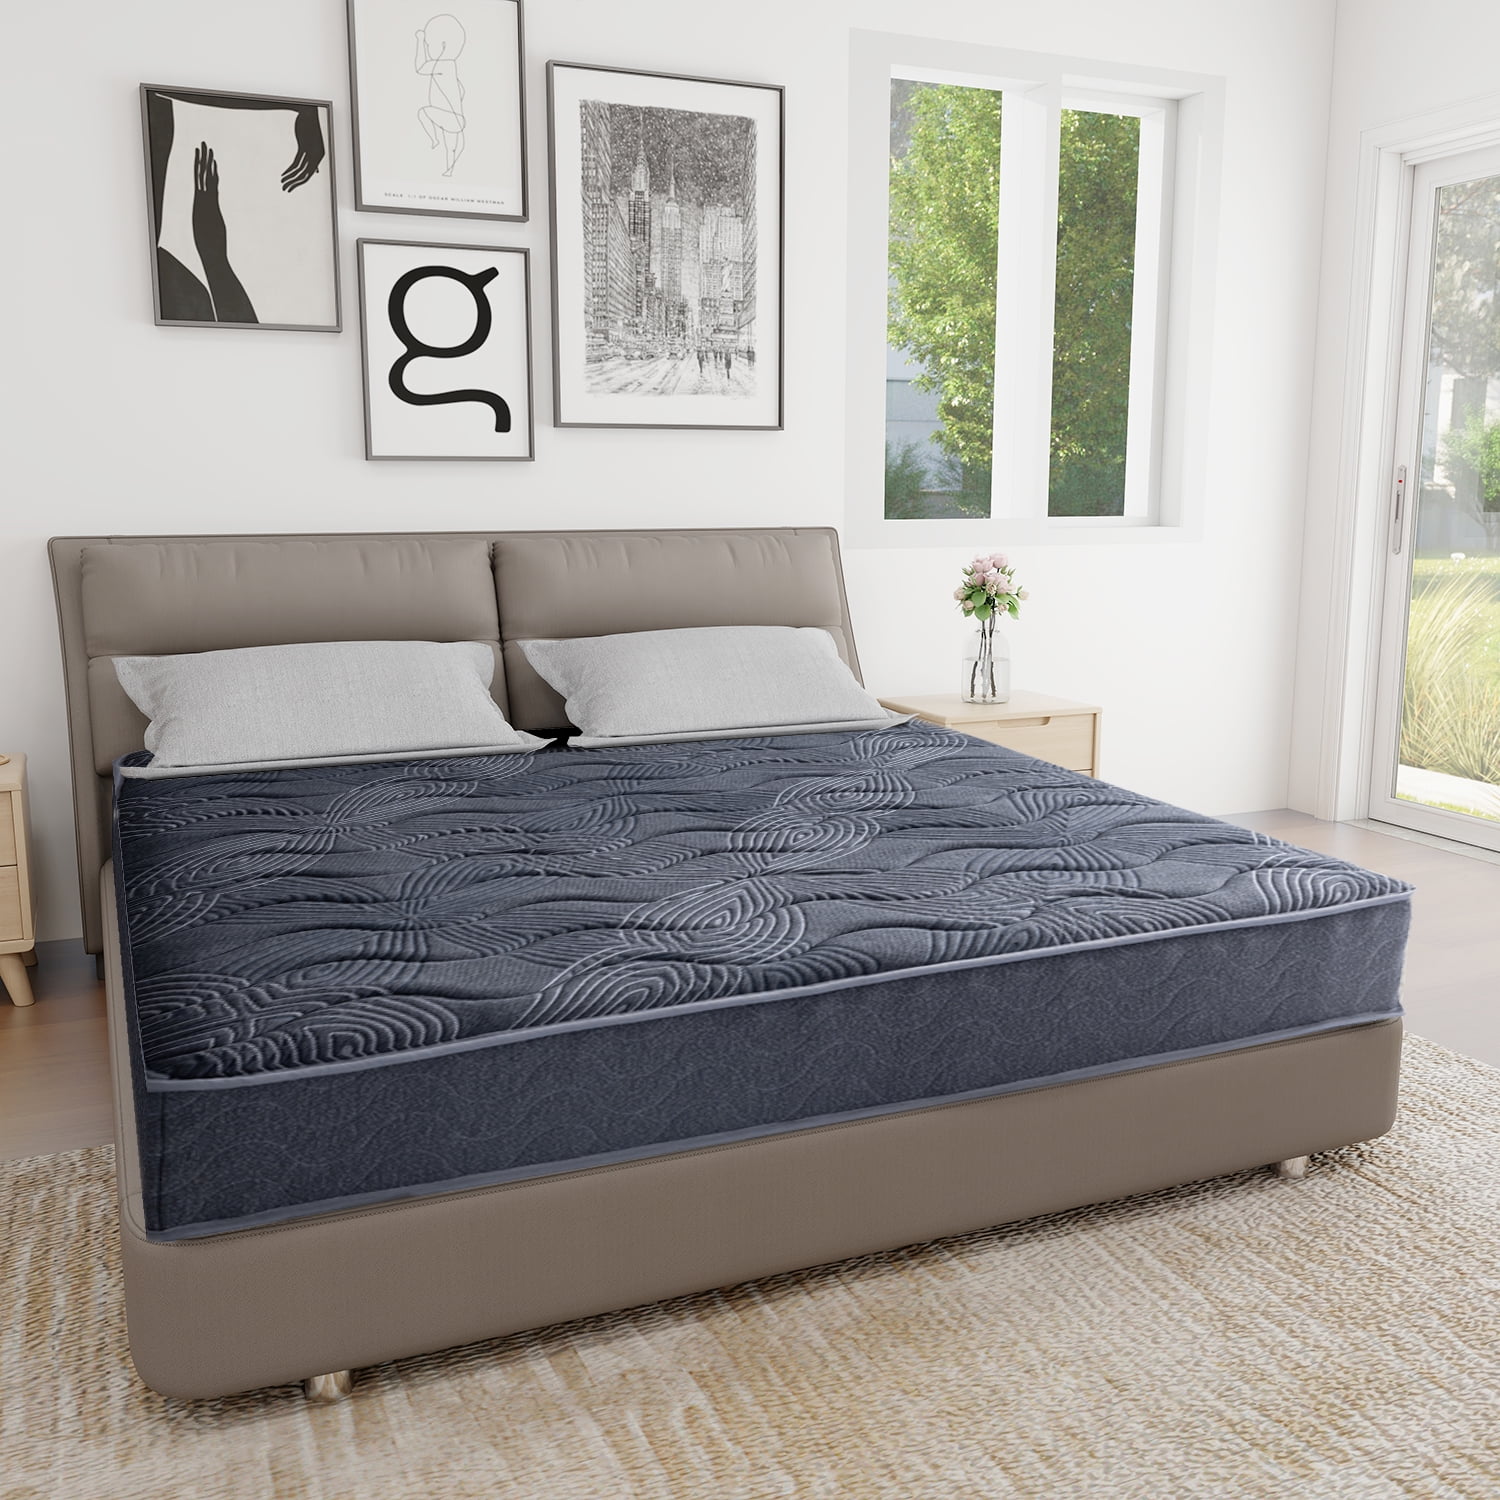 9 inches Full Size Mattress, Memory Foam Hybrid Mattress in A Box for Pain  Relief & Cool Sleep, Made in USA 